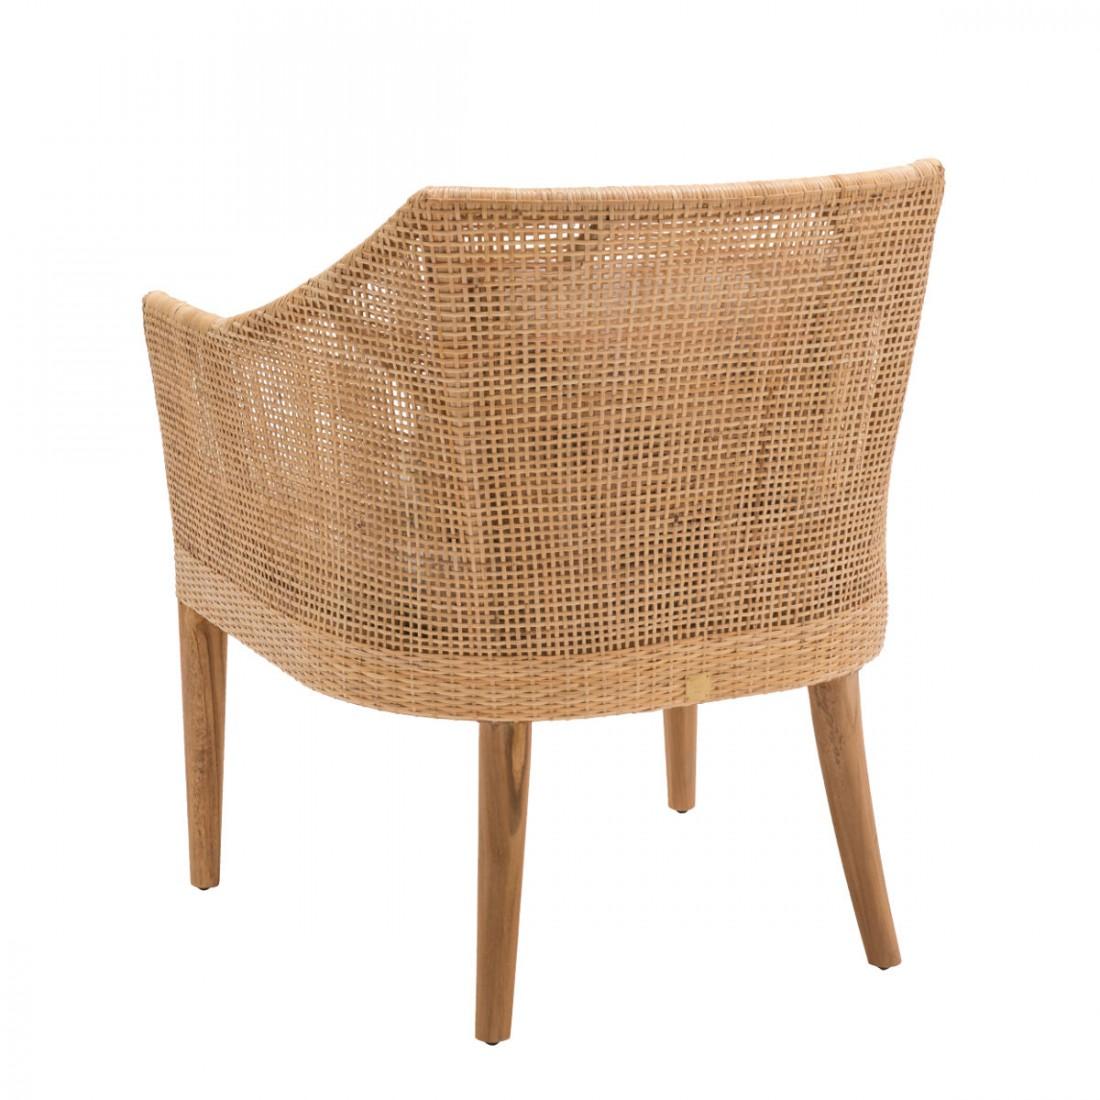 Elegant rattan armchair with wooden structure combining quality, robustness and class. Comfortable and ergonomic, aerial and poetic. The seat height with cushion is 42cm ( 35cm without ) All the cushions are include . In excellent condition (new